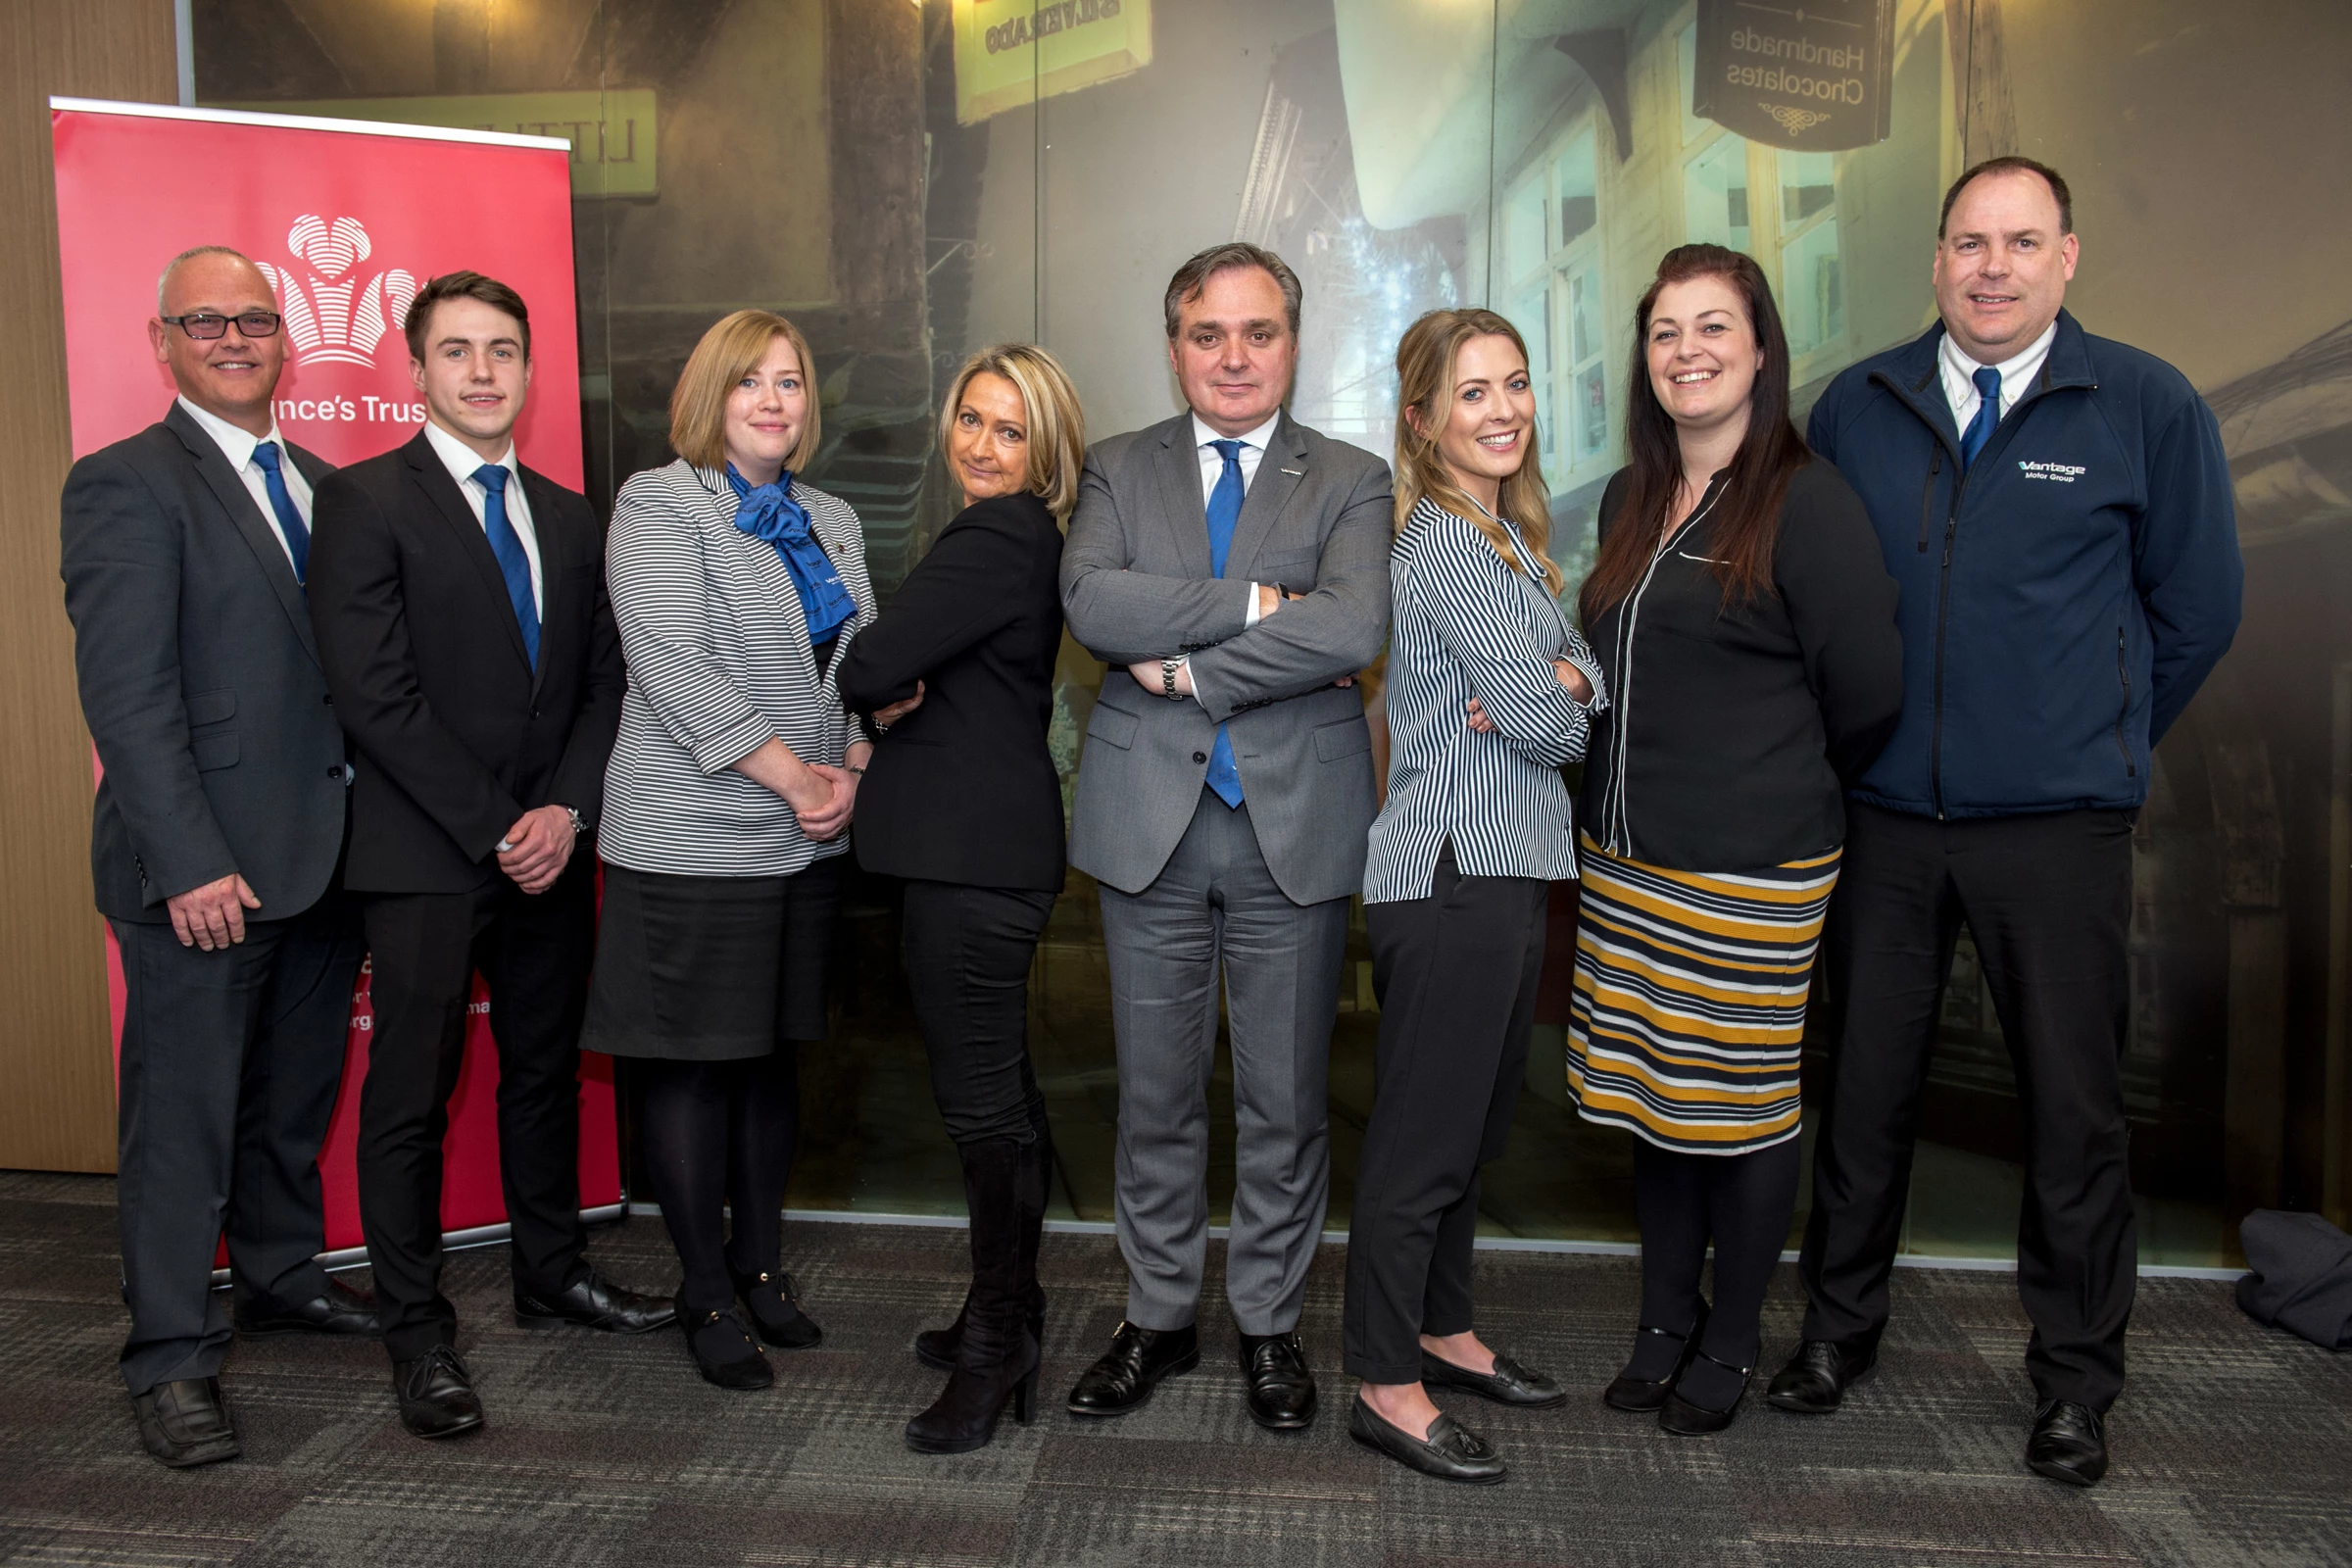 •	Pictured from left to right: Martin Baxendale, William Welsh, Jemma McCarthy, Jo Williamson Gordons LLP, Mark Robinson Vantage MD, Olivia Jeffery The Prince's Trust, Jayne Pearce and David Thacker.